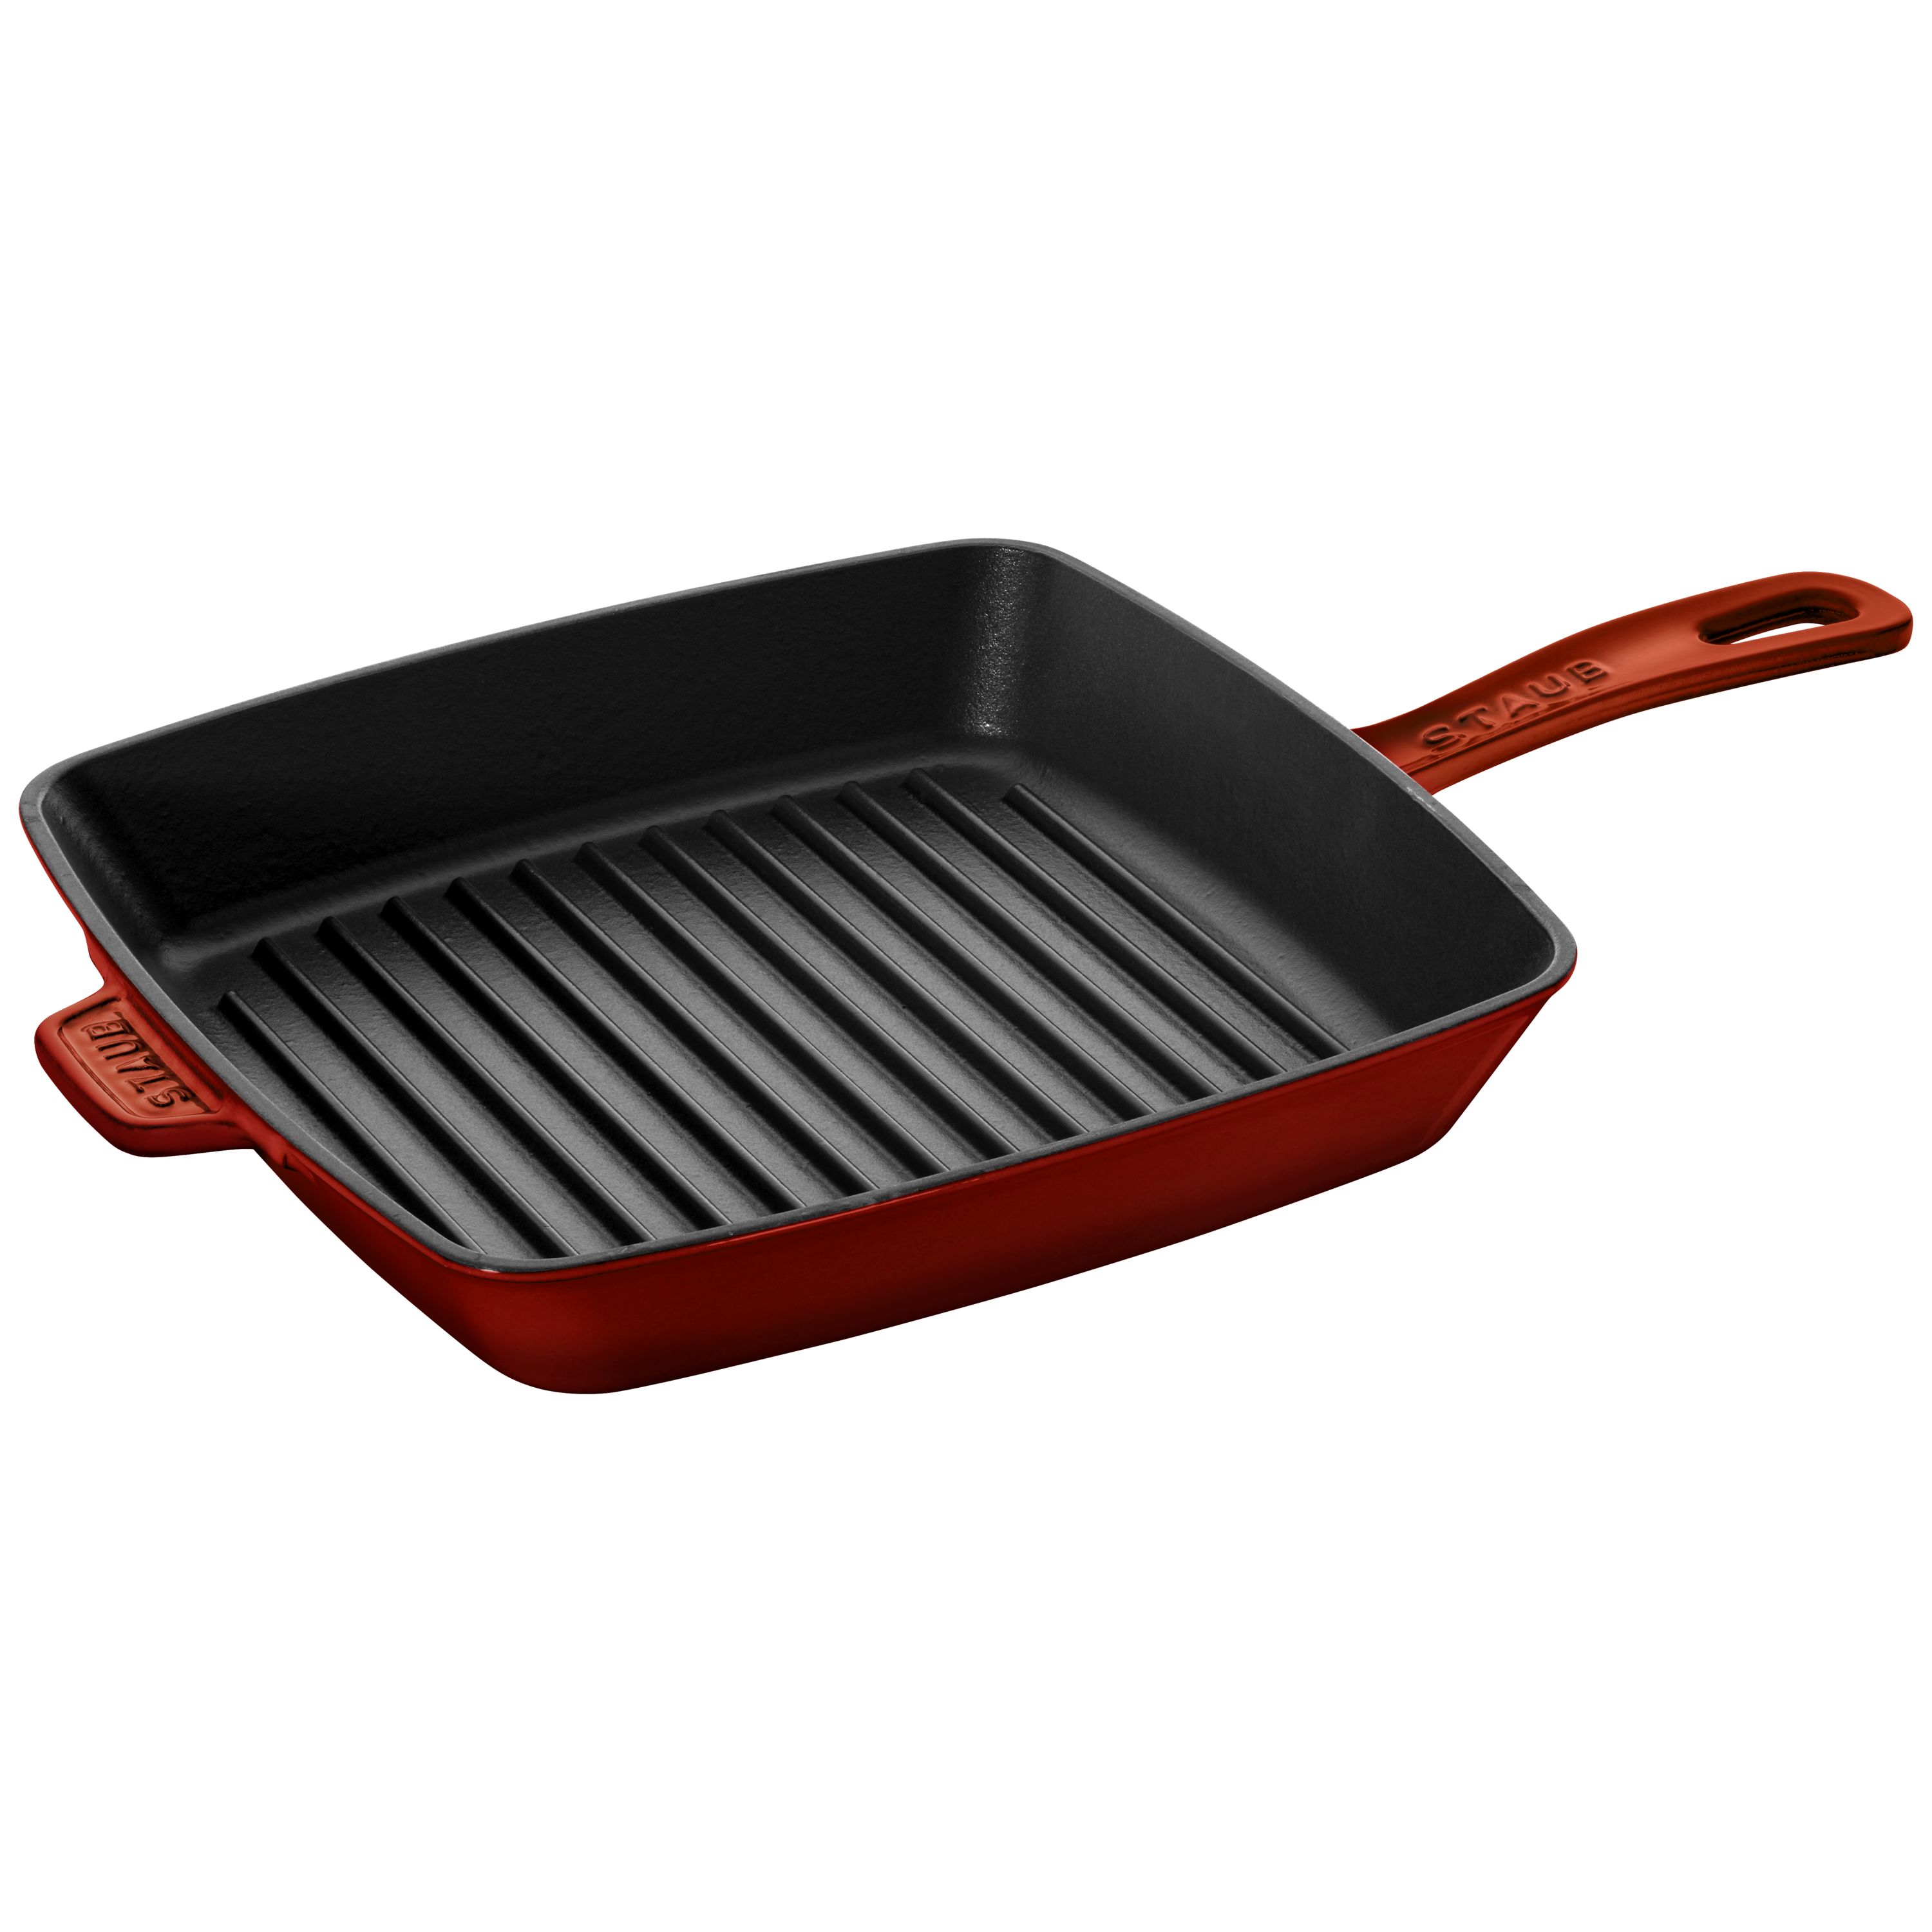  Staub Cast Iron 12-inch Fry Pan - Grenadine, Made in France :  Home & Kitchen